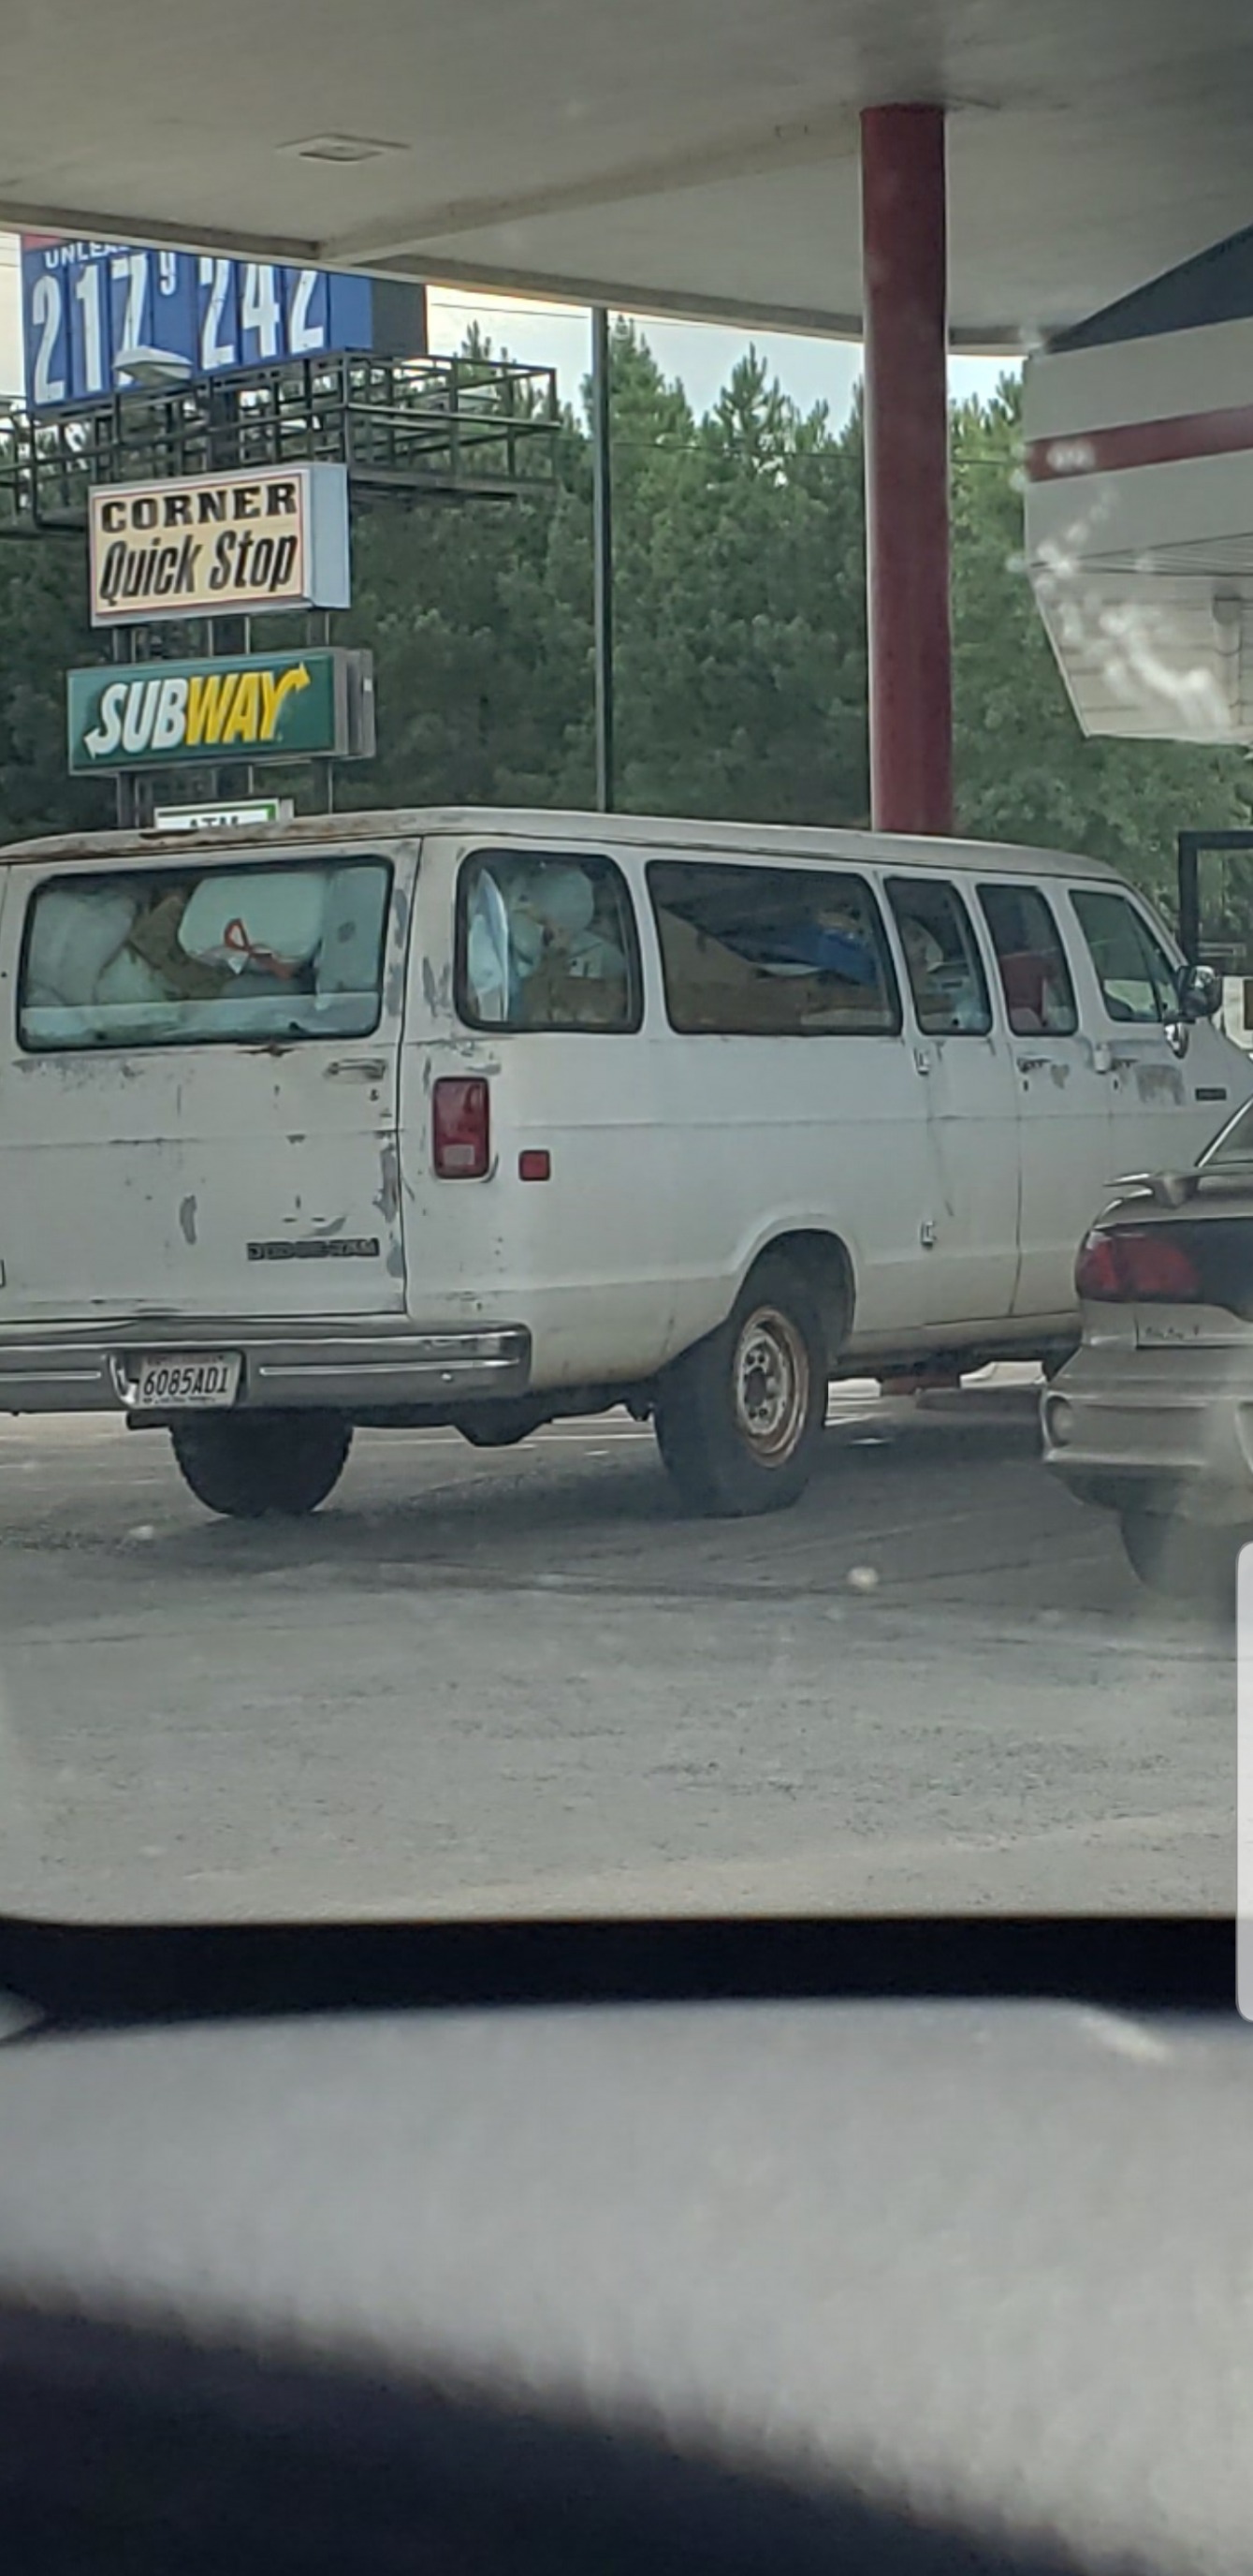 High Quality Van at gas station Blank Meme Template